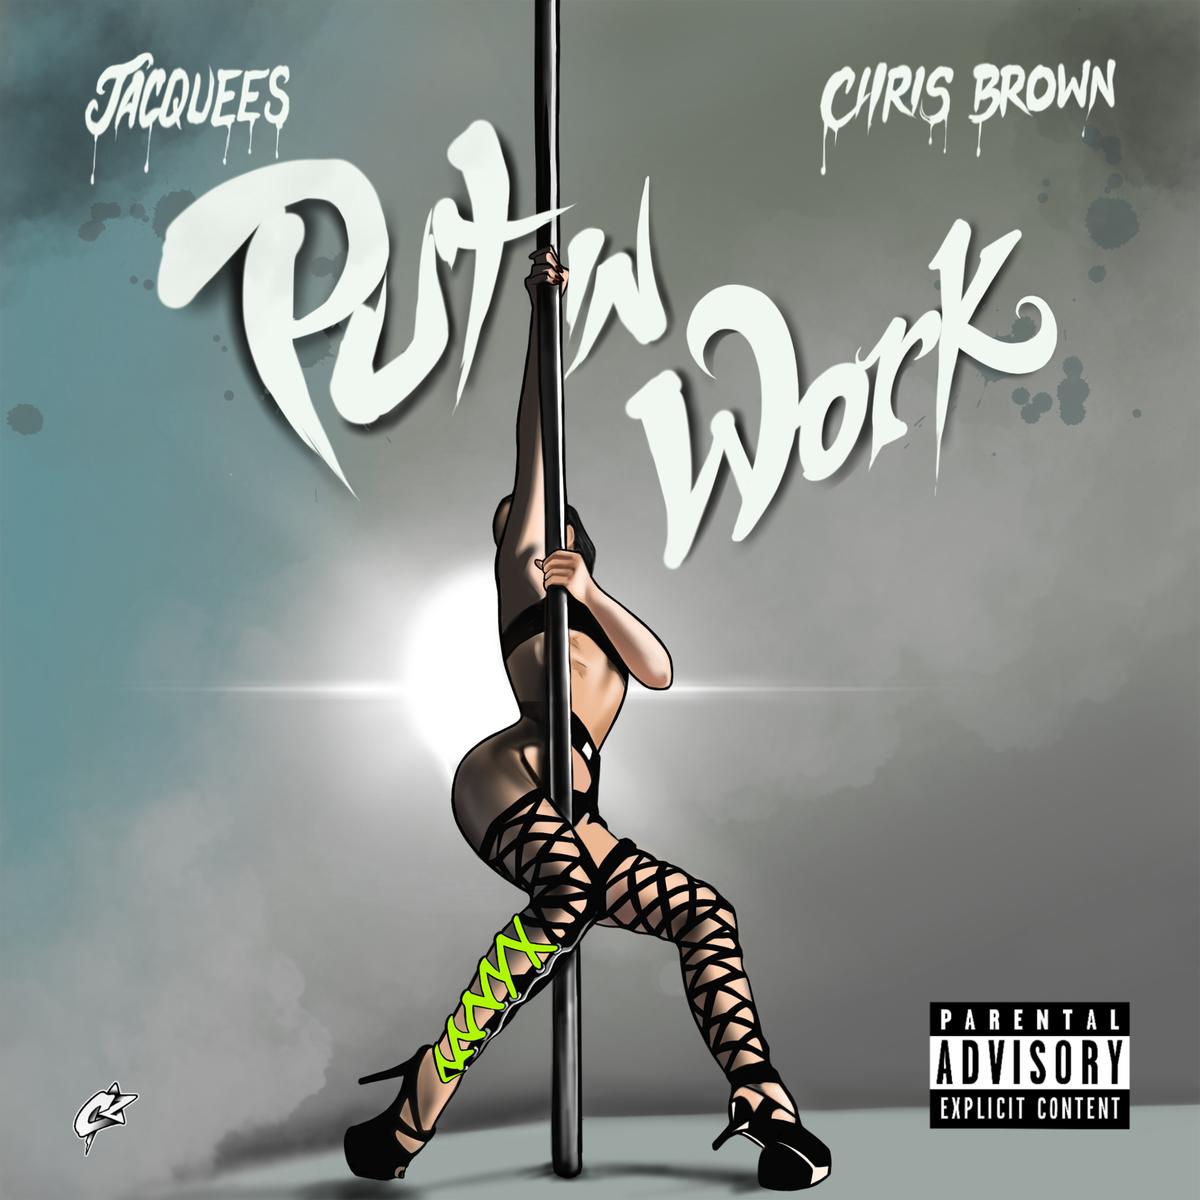 Chris Brown & Jacquees Release “Put In Work”